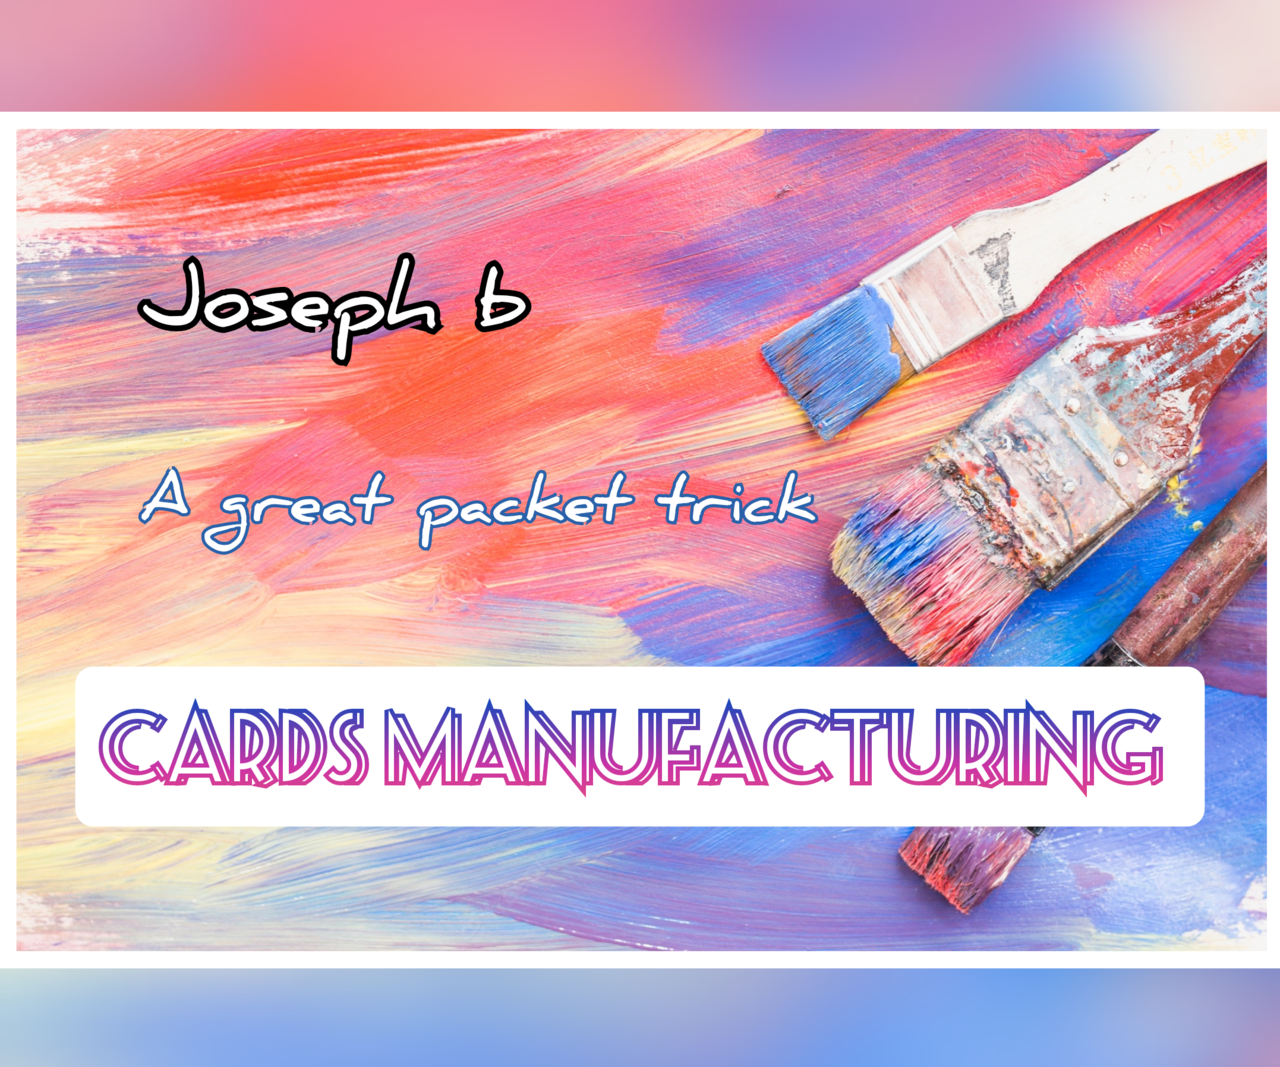 Cards Manufacturing by Joseph B. (Mp4 Video Download)